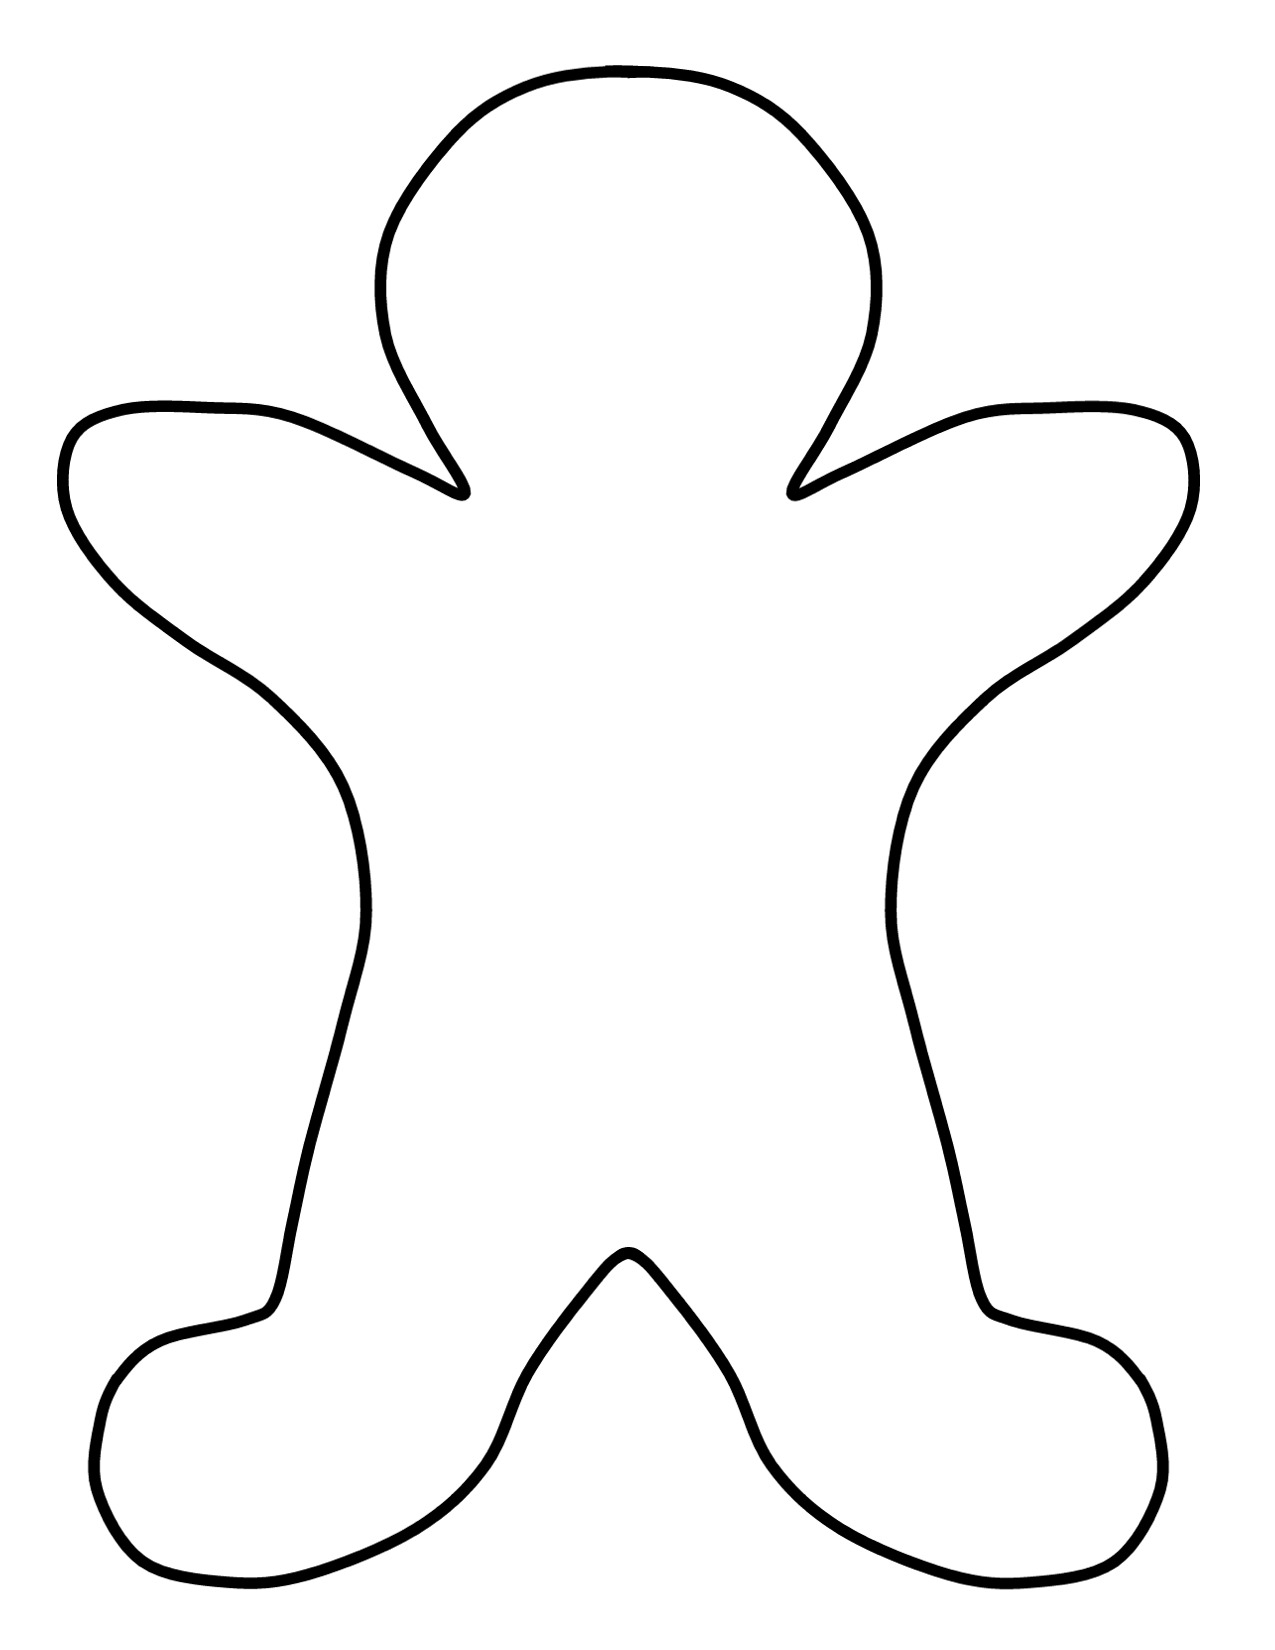 Free Gingerbread Man Outline, Download Free Clip Art, Free.